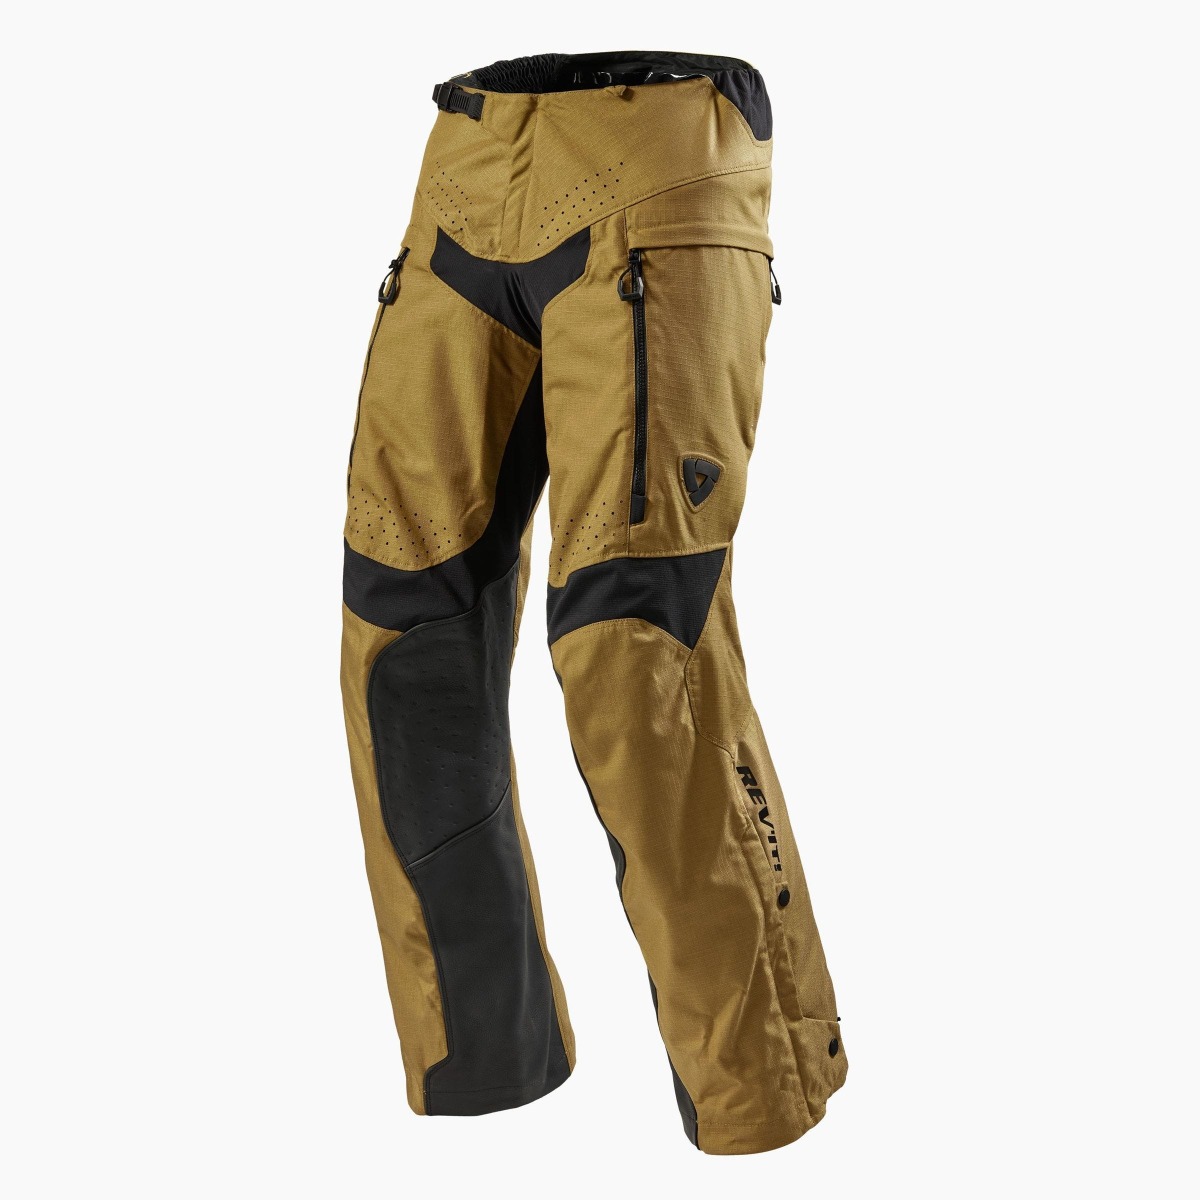 Image of REV'IT! Continent Ocher Yellow Motorcycle Pants Size S ID 8700001297172